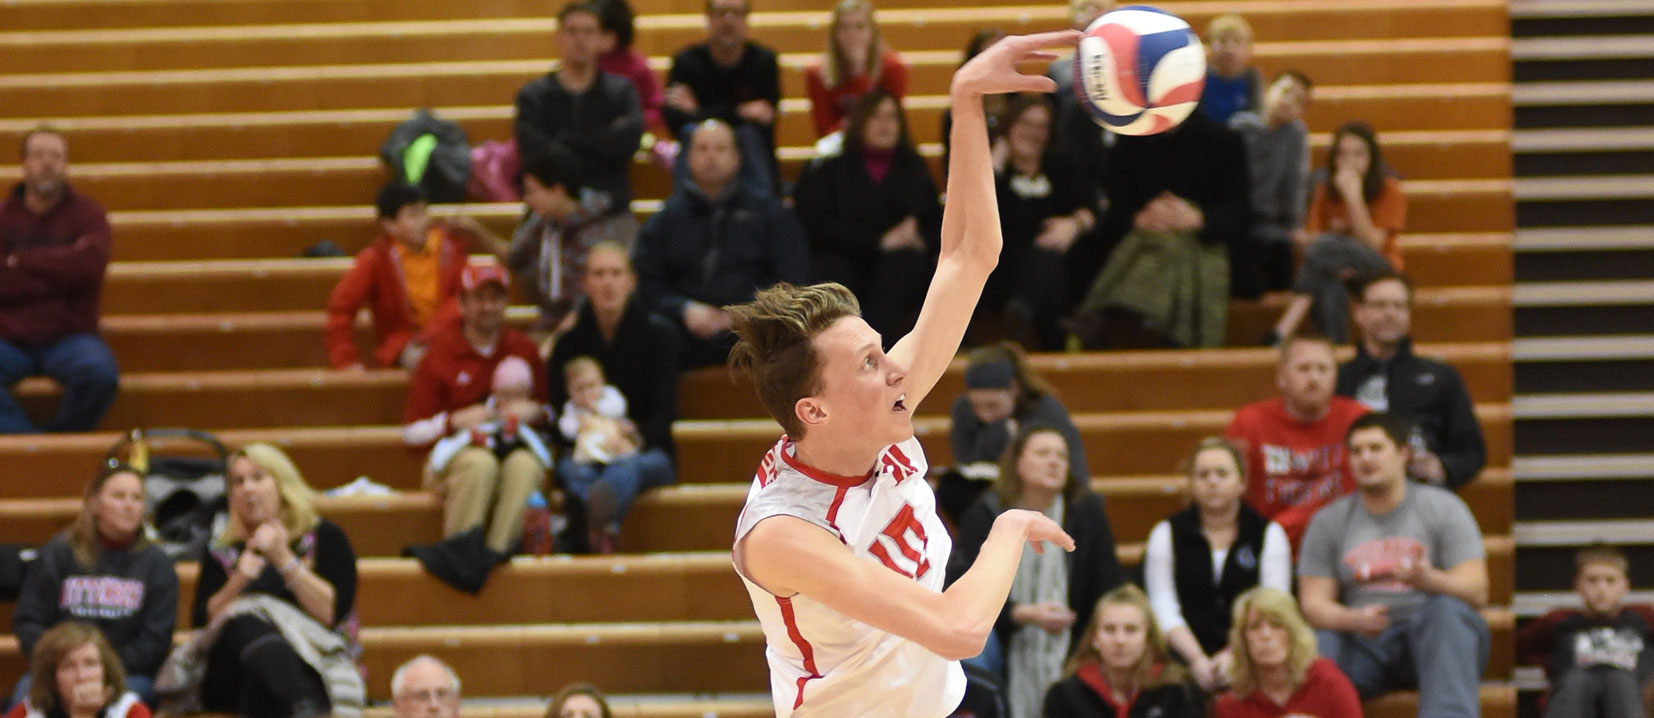 Joel Sotos led Wittenberg with 14 kills in a 3-0 sweep at Brooklyn. File Photo | Nick Falzerano